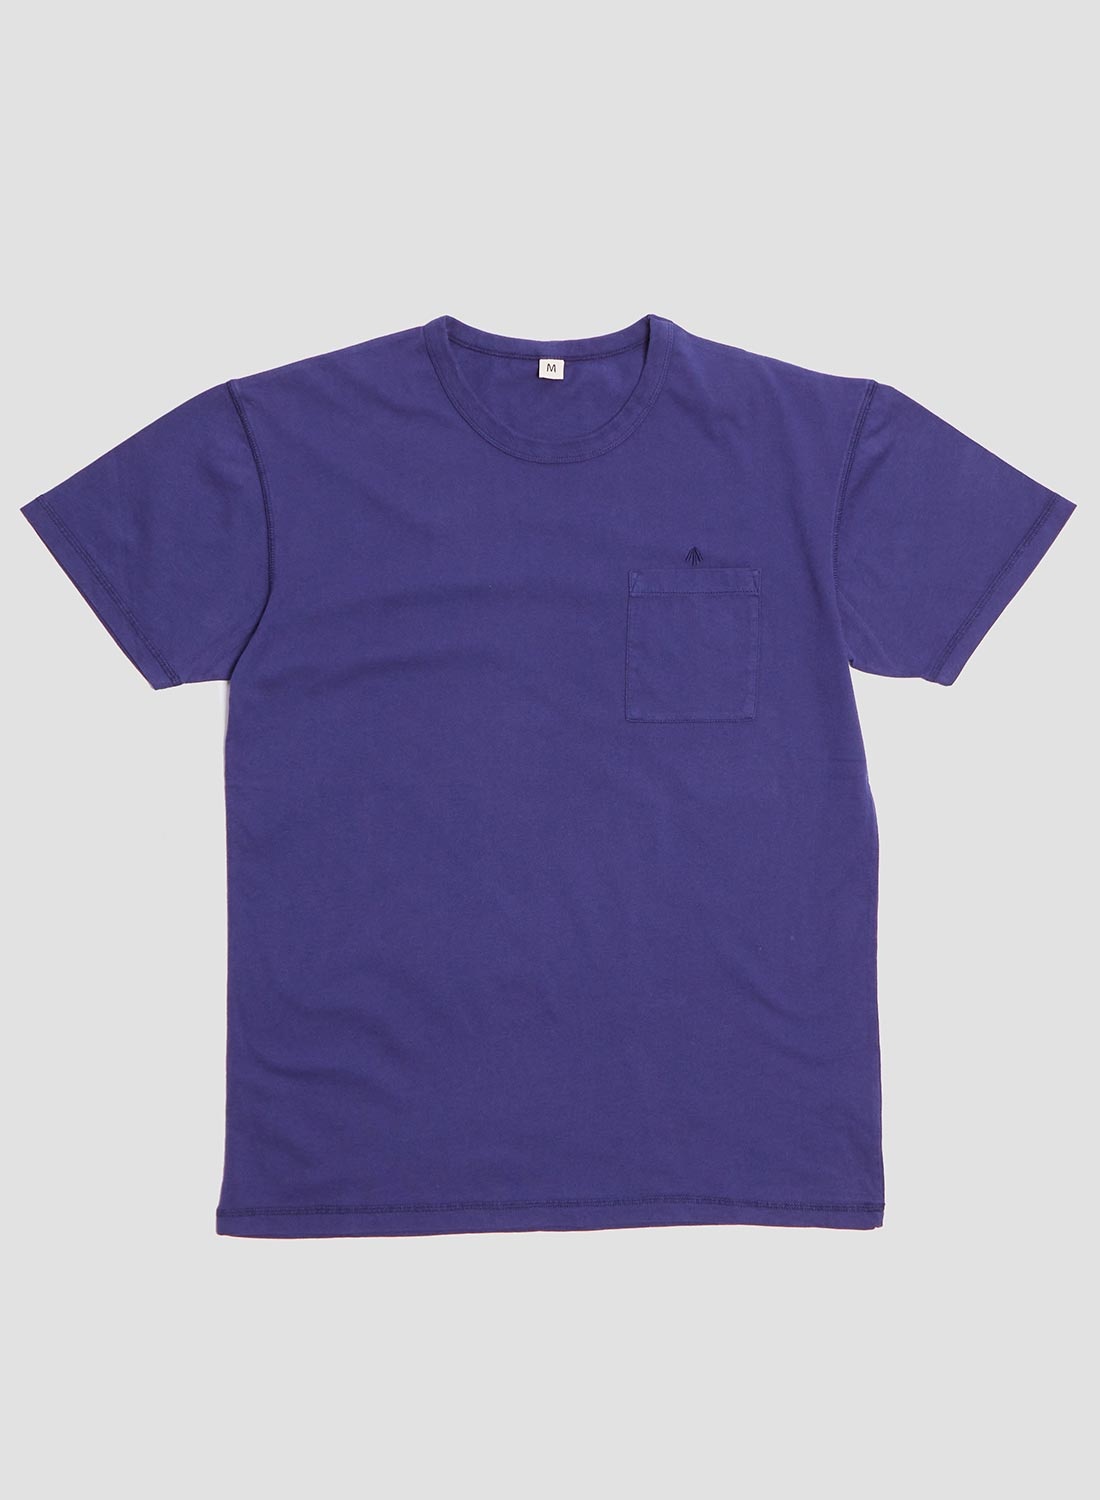 Classic Pocket Tee in Royal Blue - 1